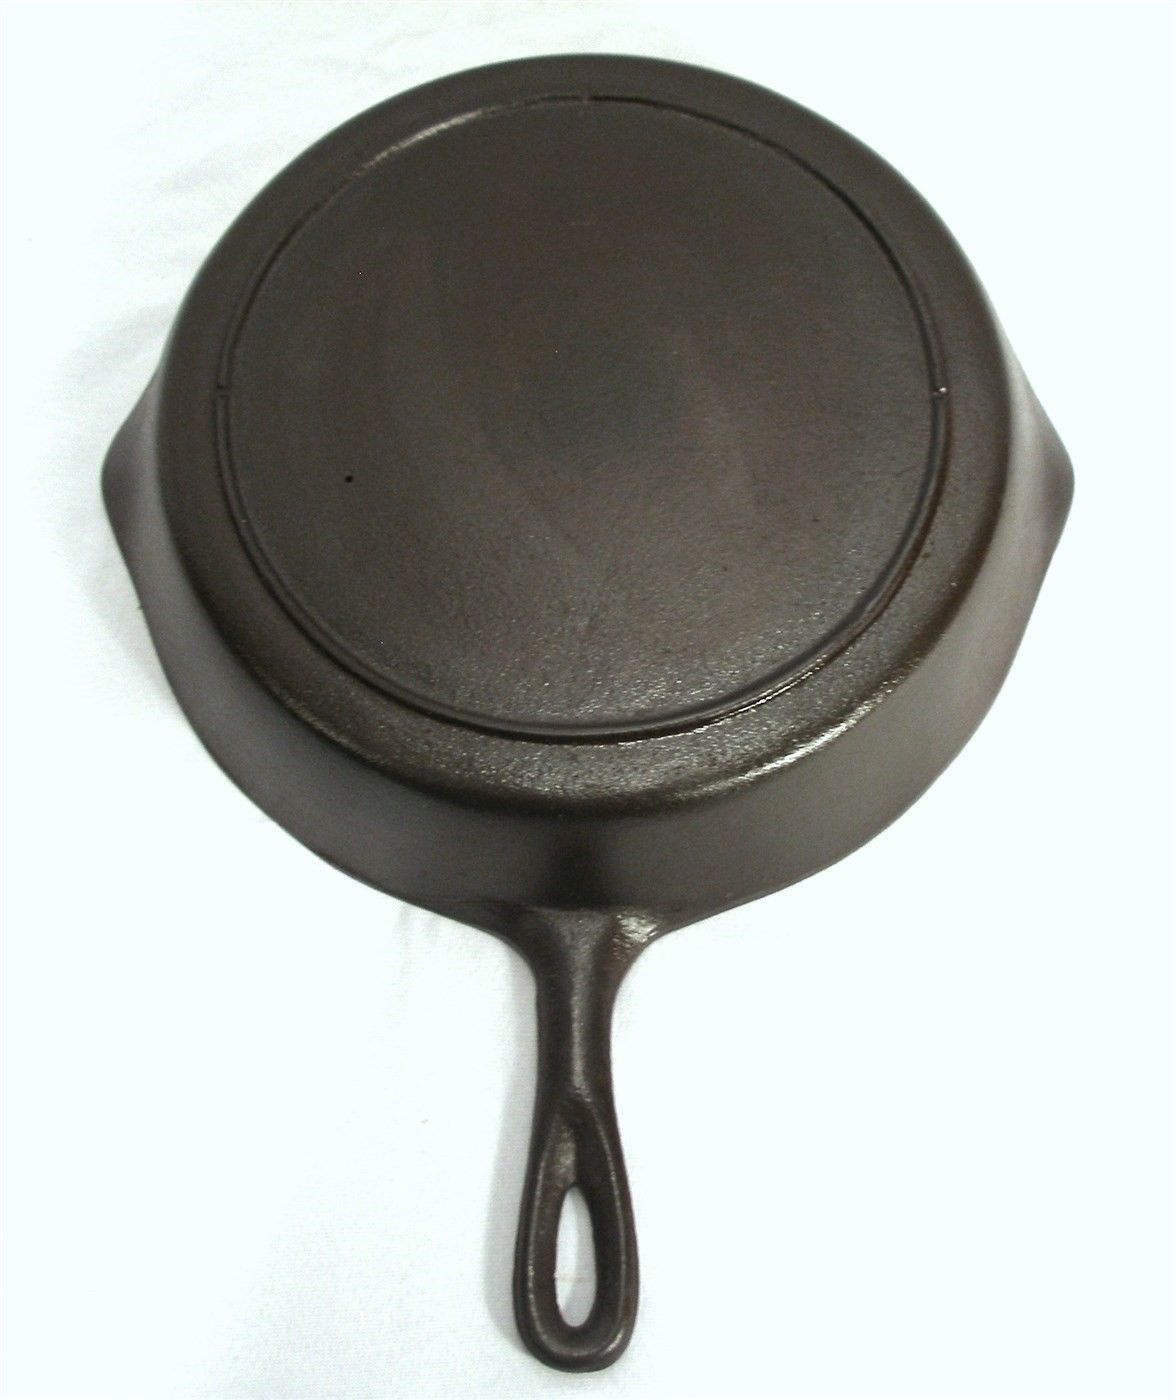 Old Lodge Collectible Cast Iron Frying Pan Skillet / Fryer Dutch